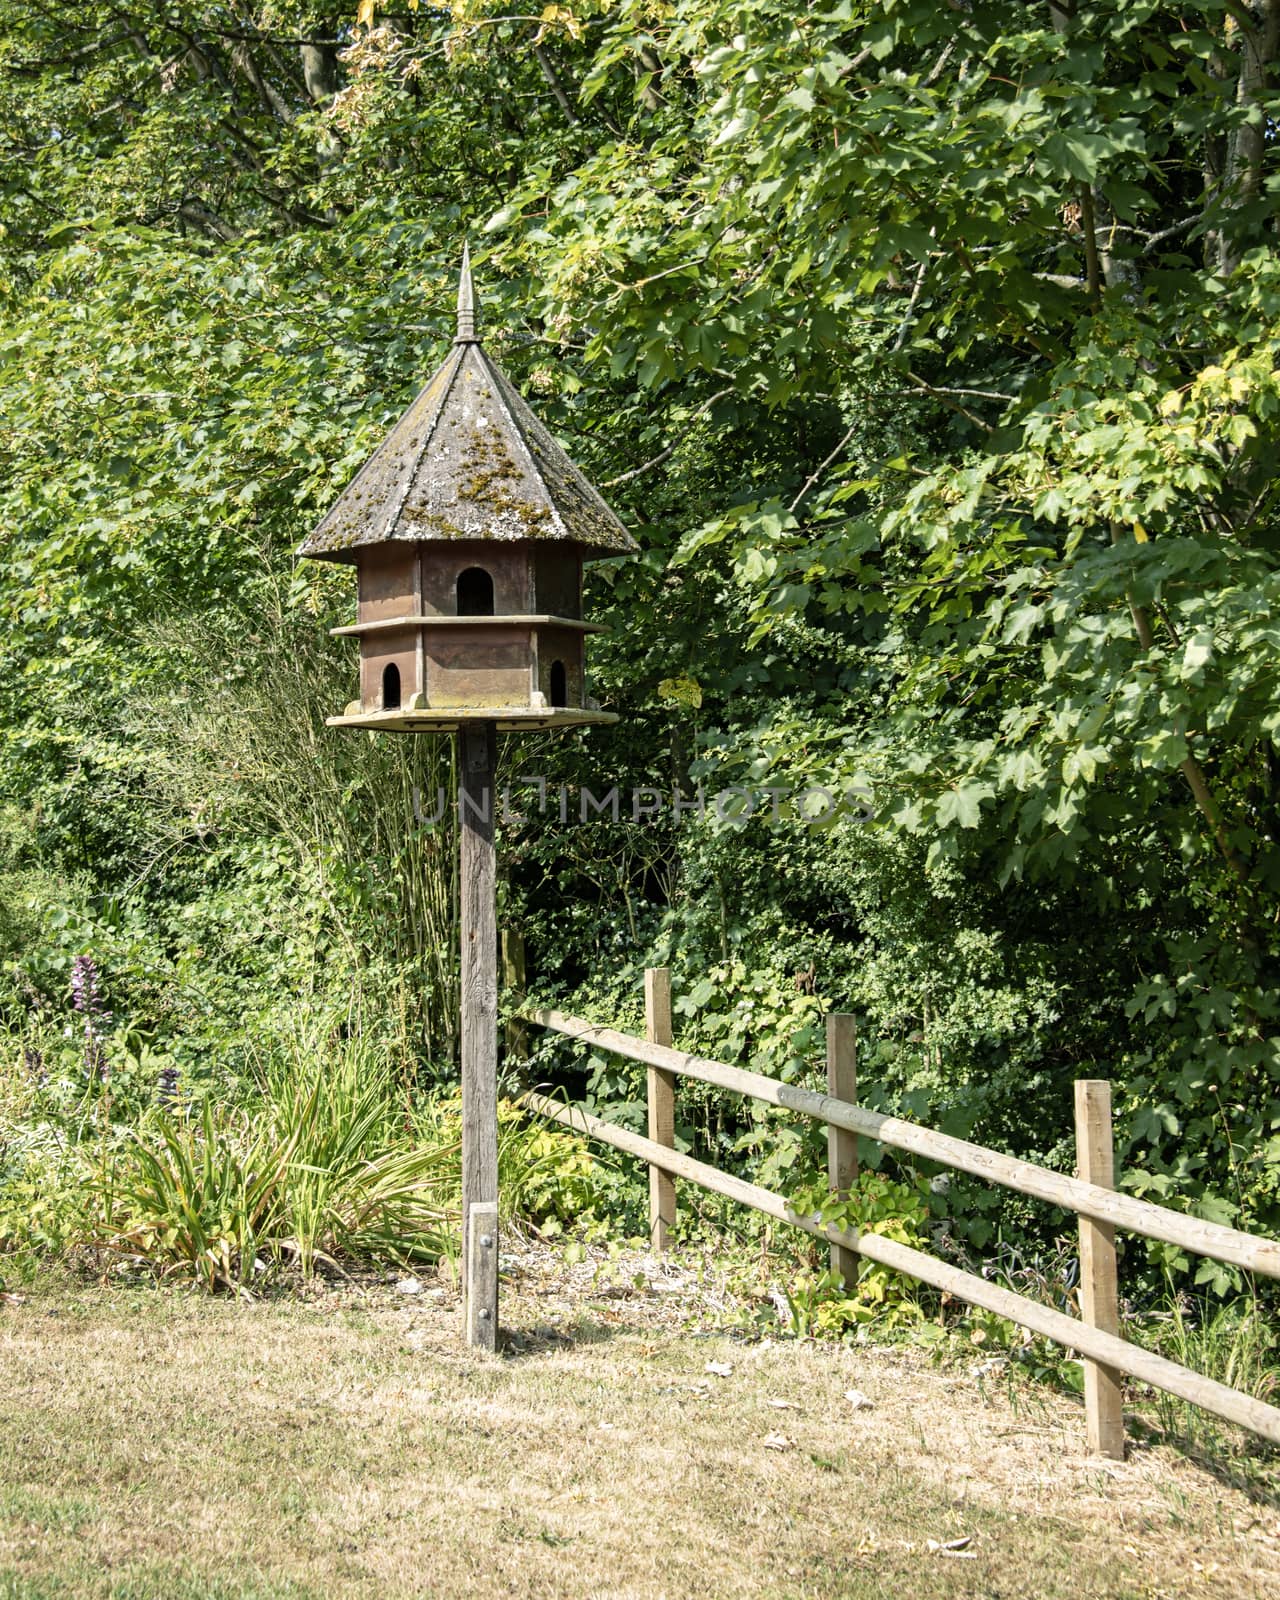 UK, Launde Abbey, Leicestershire - July 2018: Large wooden dove cote in the afternoon s